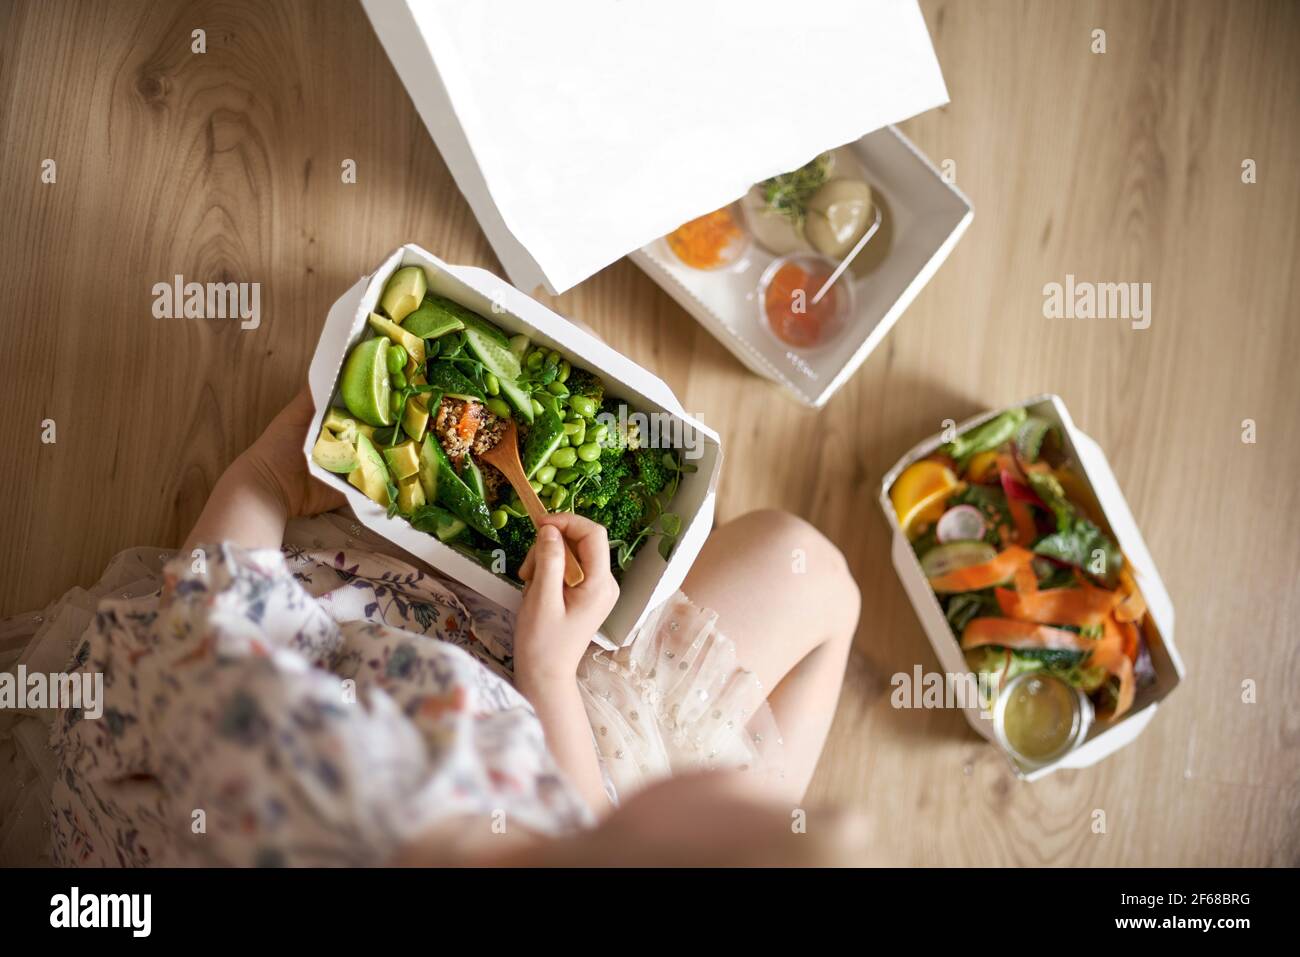 https://c8.alamy.com/comp/2F68BRG/food-delivery-concept-the-girl-takes-out-salads-from-the-package-healthy-food-top-view-copy-space-paper-container-mockup-2F68BRG.jpg